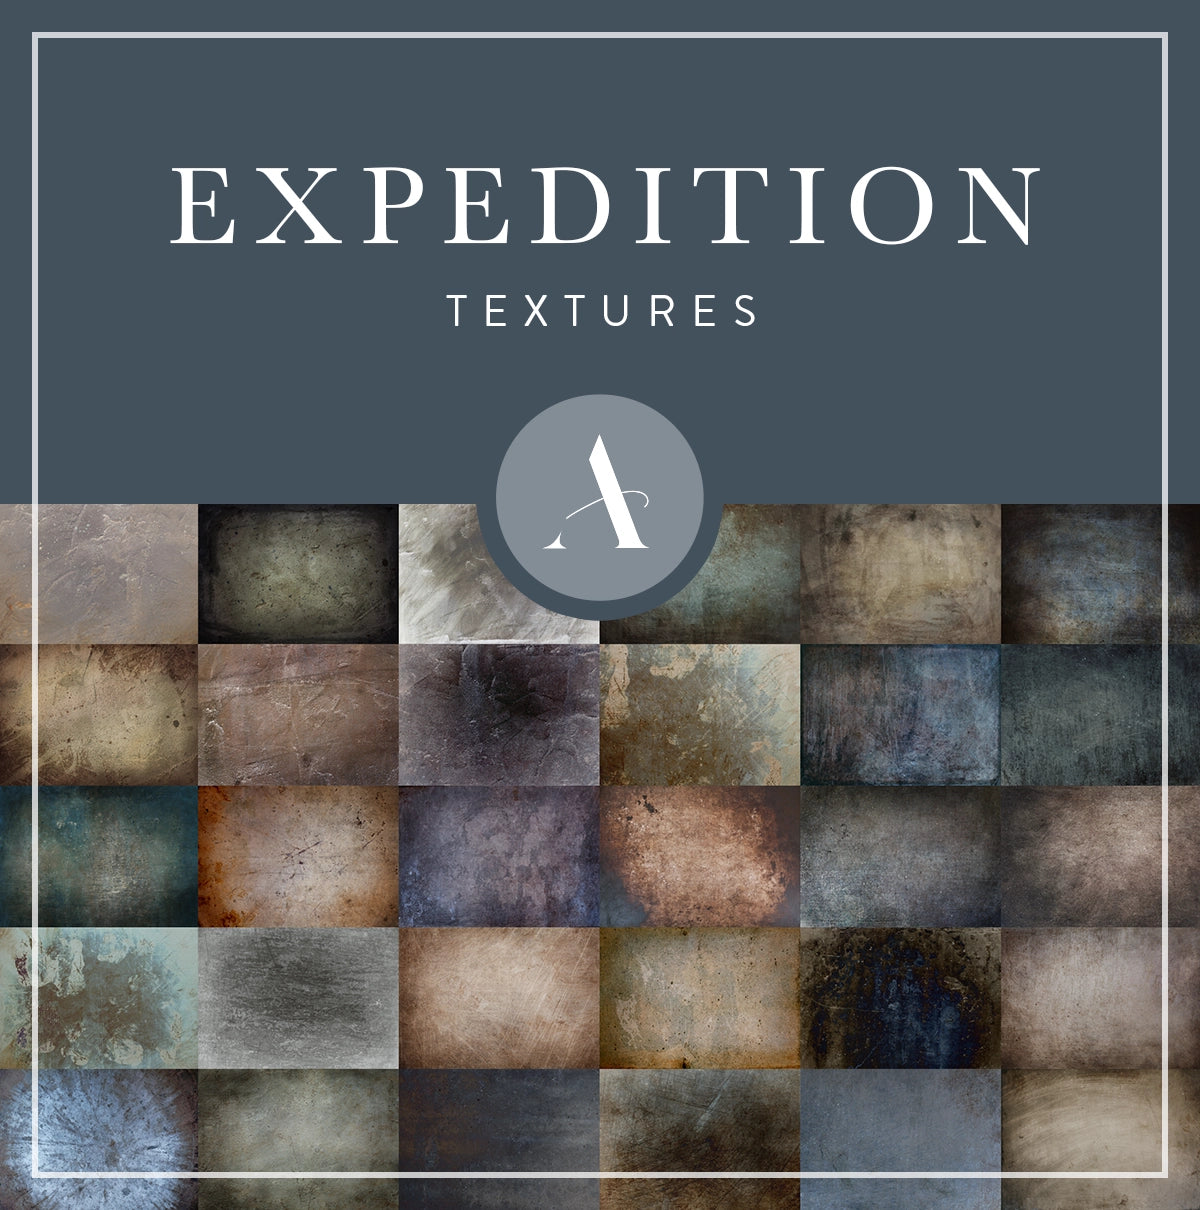 Expedition Textures